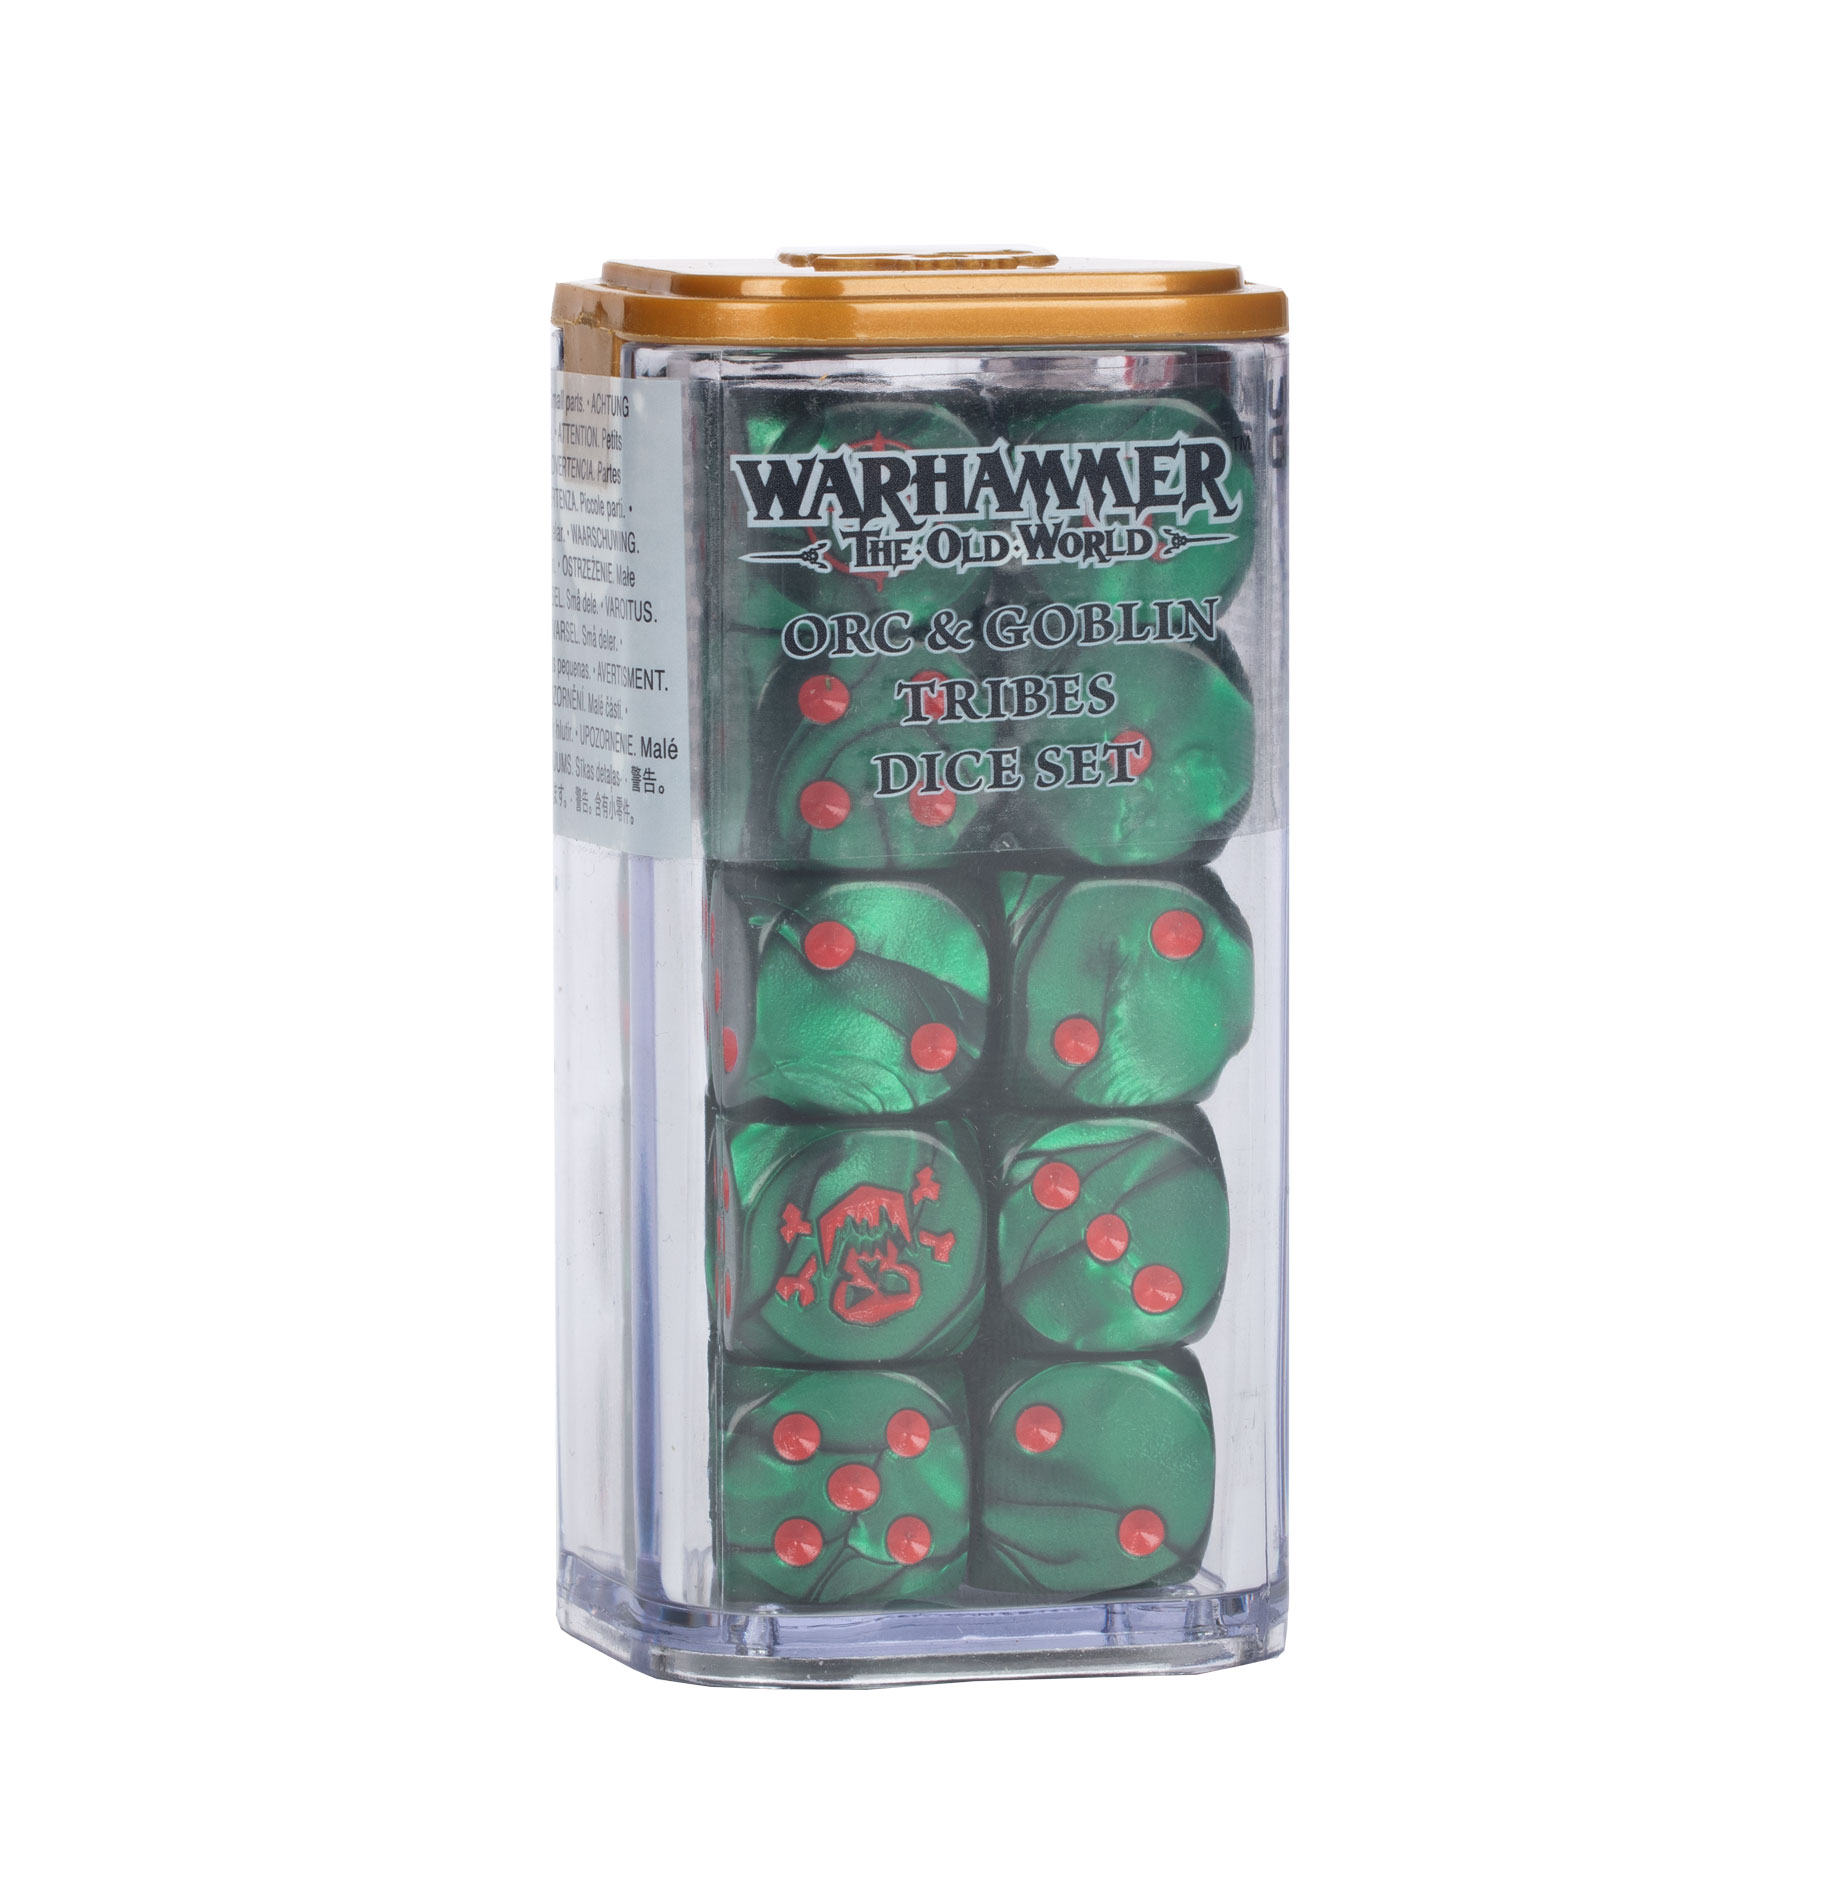 Warhammer: The Old World: Orc and Goblin Tribes Dice 